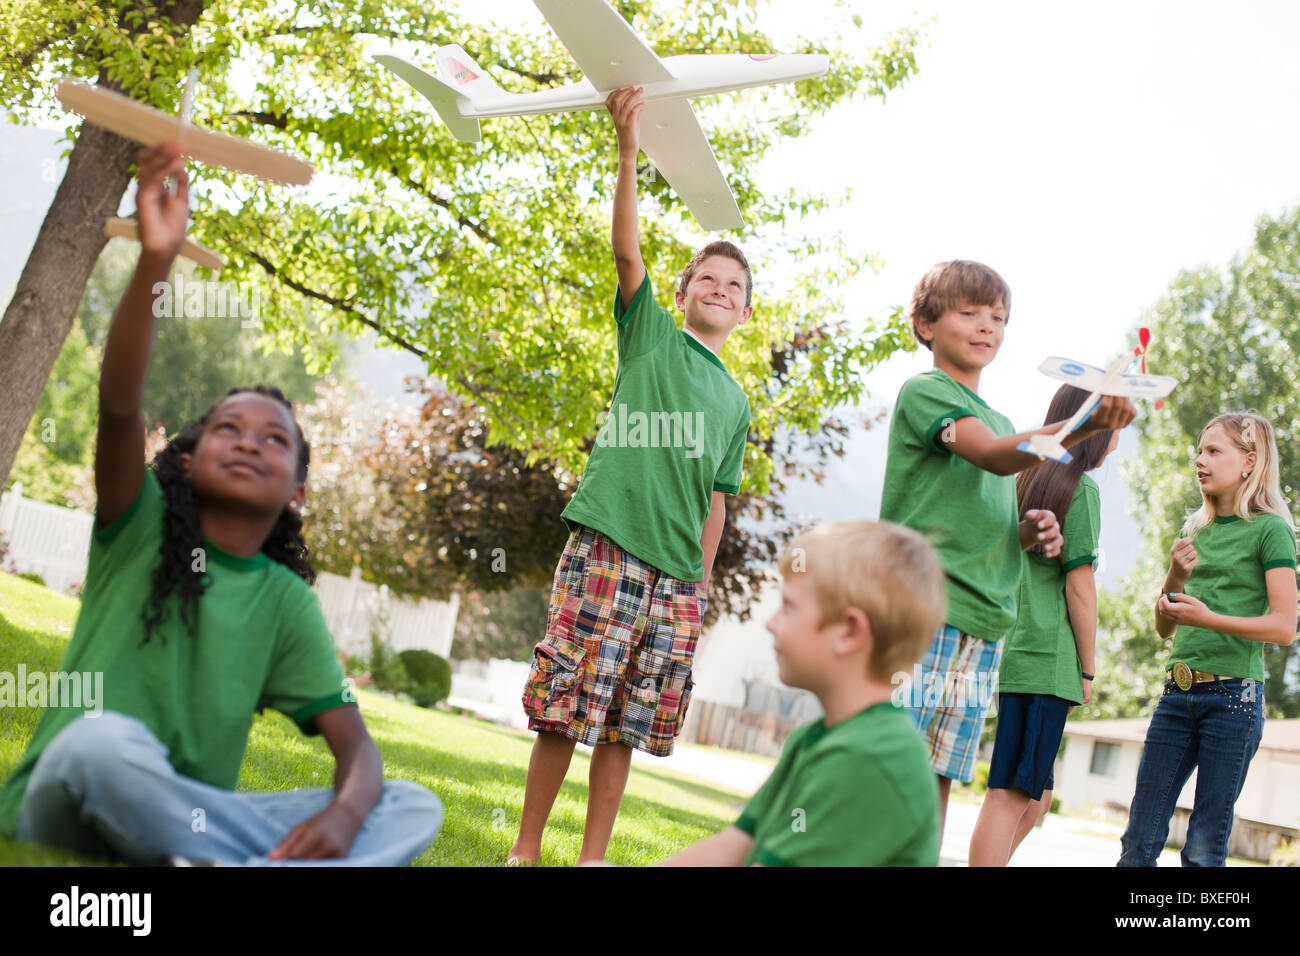 Group of children playing with toy airplanes Stock Photo